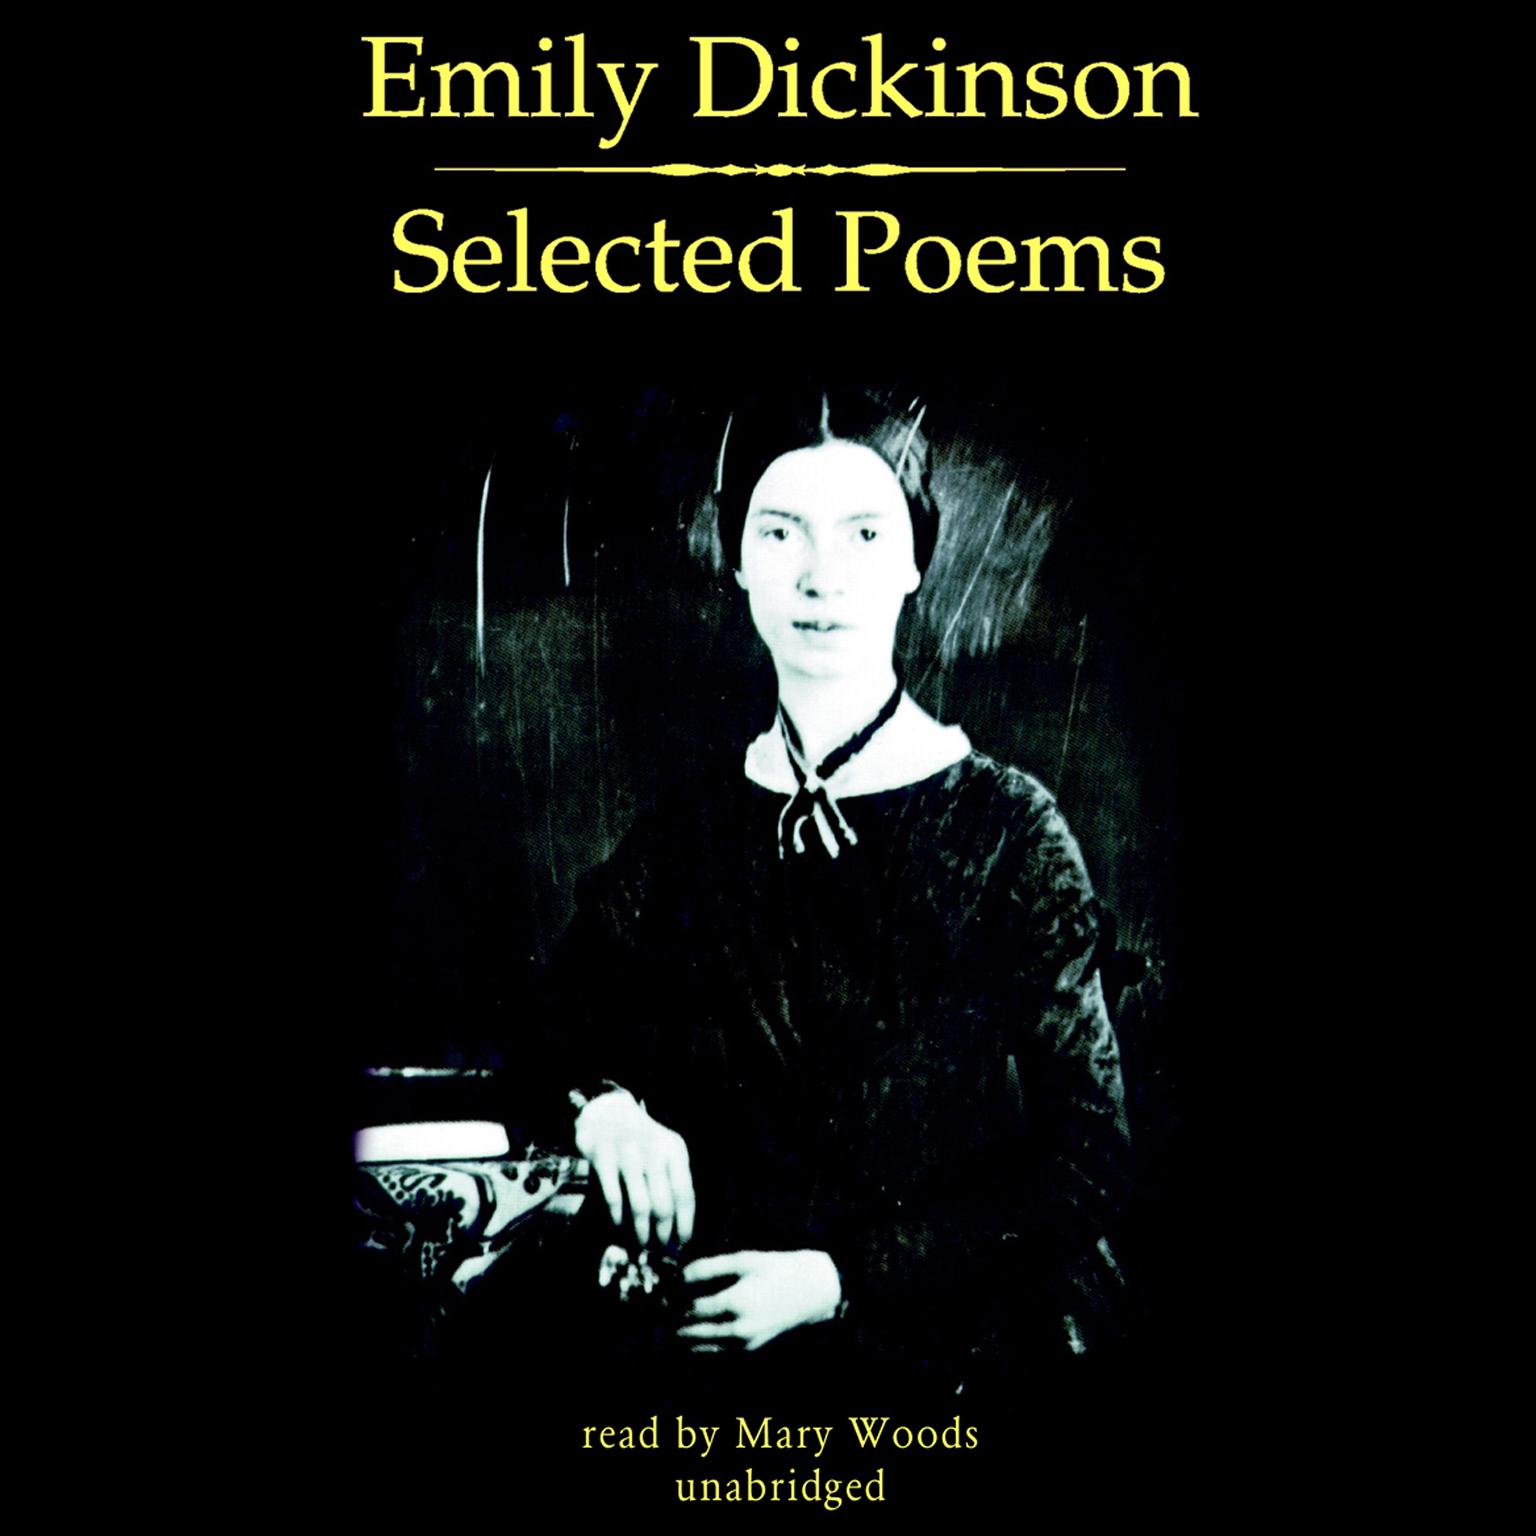 Emily Dickinson: Selected Poems Audiobook, by Emily Dickinson